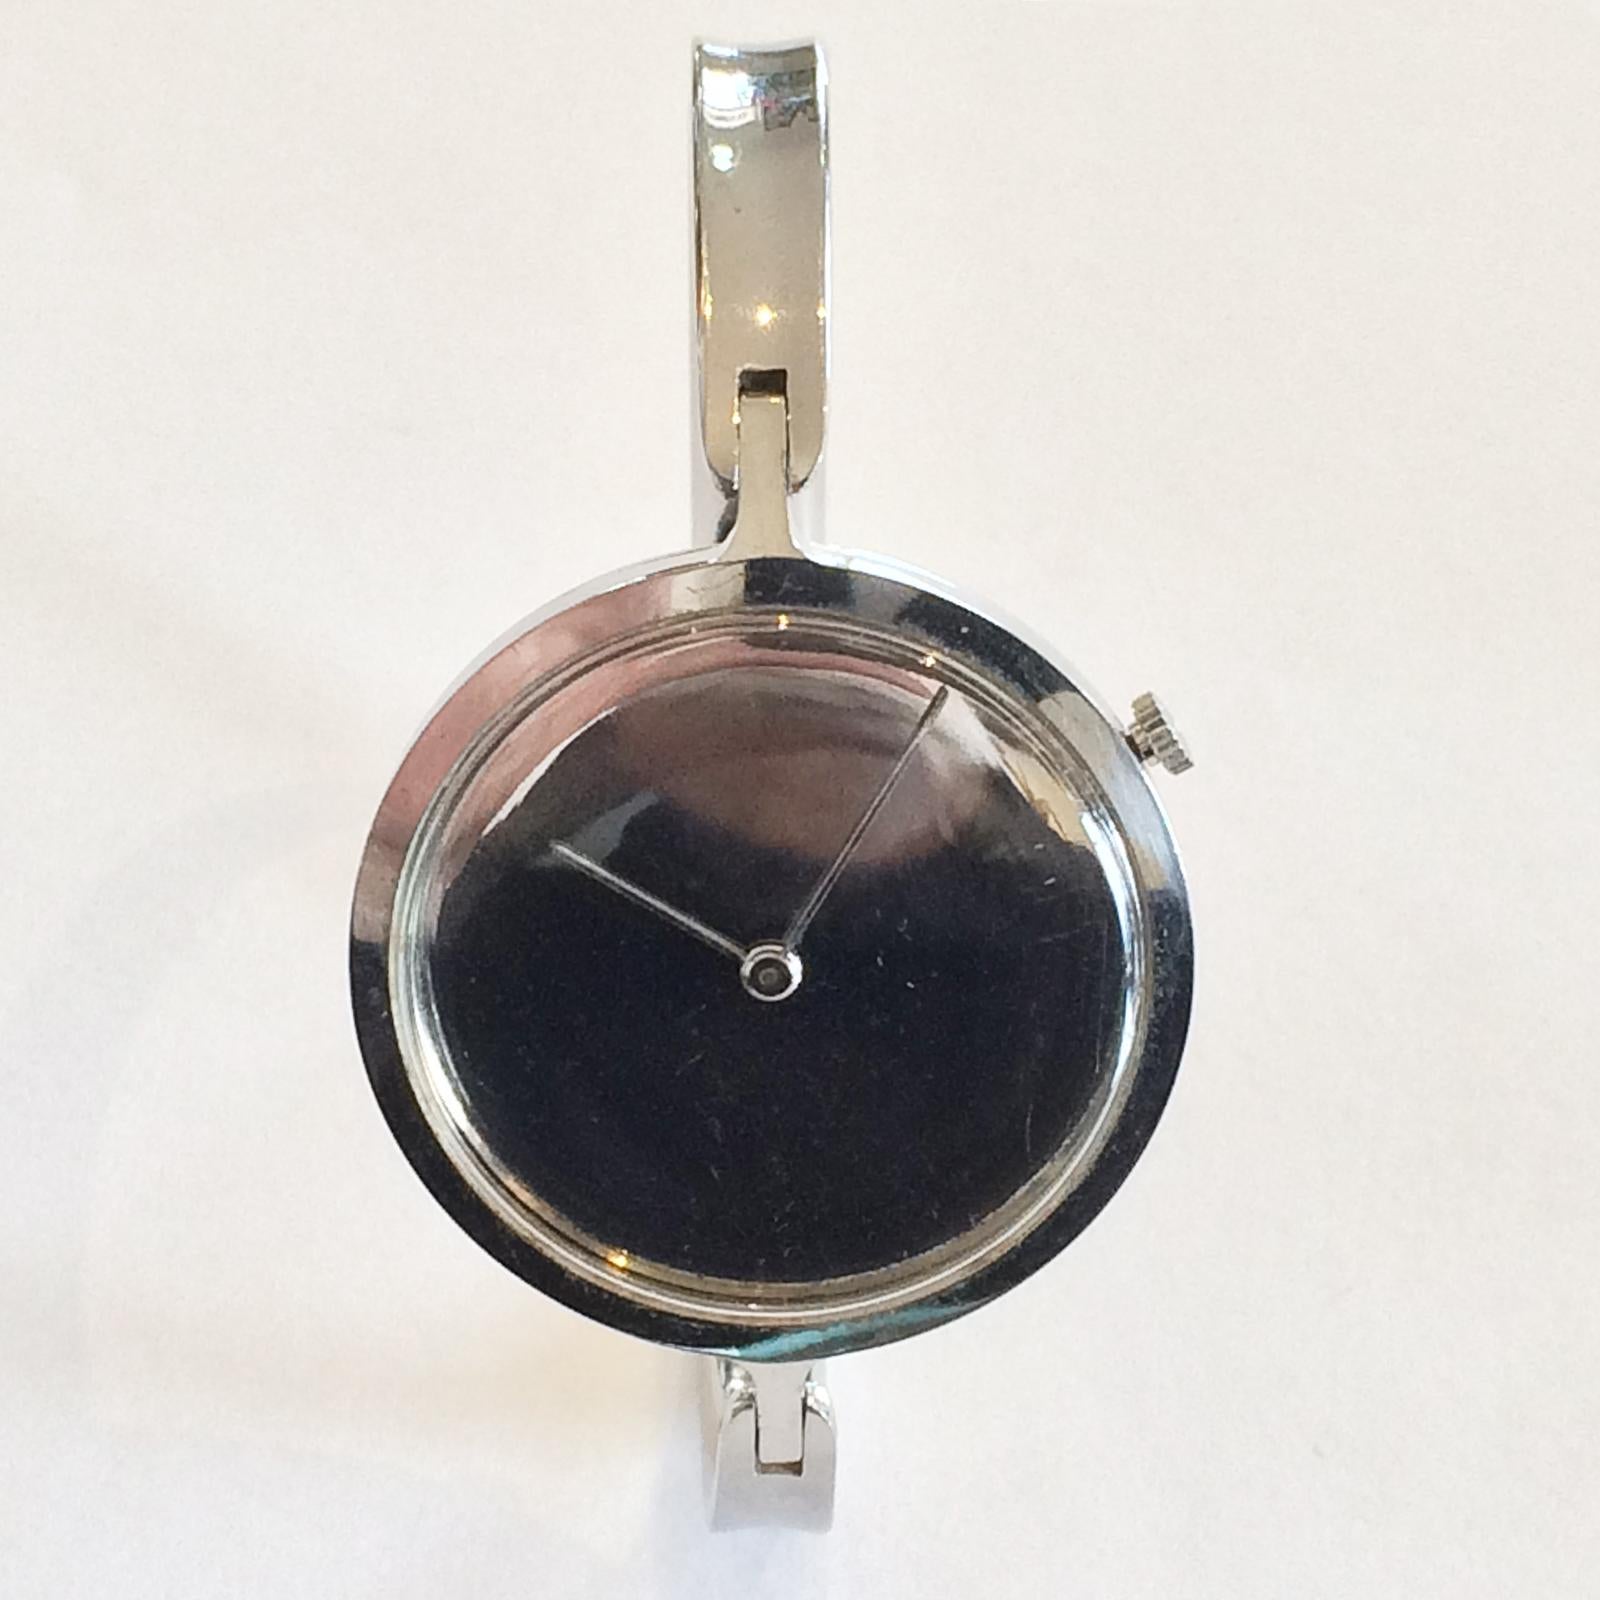 Authentic Georg Jensen Ladies Bangle Watch, Viviana Design No. 336 by Torun, Denmark. The original Crown offset to the 4 position, has raised, interlocked Initials “GJ”. This Analog watch is in excellent condition, for age, with a Swiss Quartz